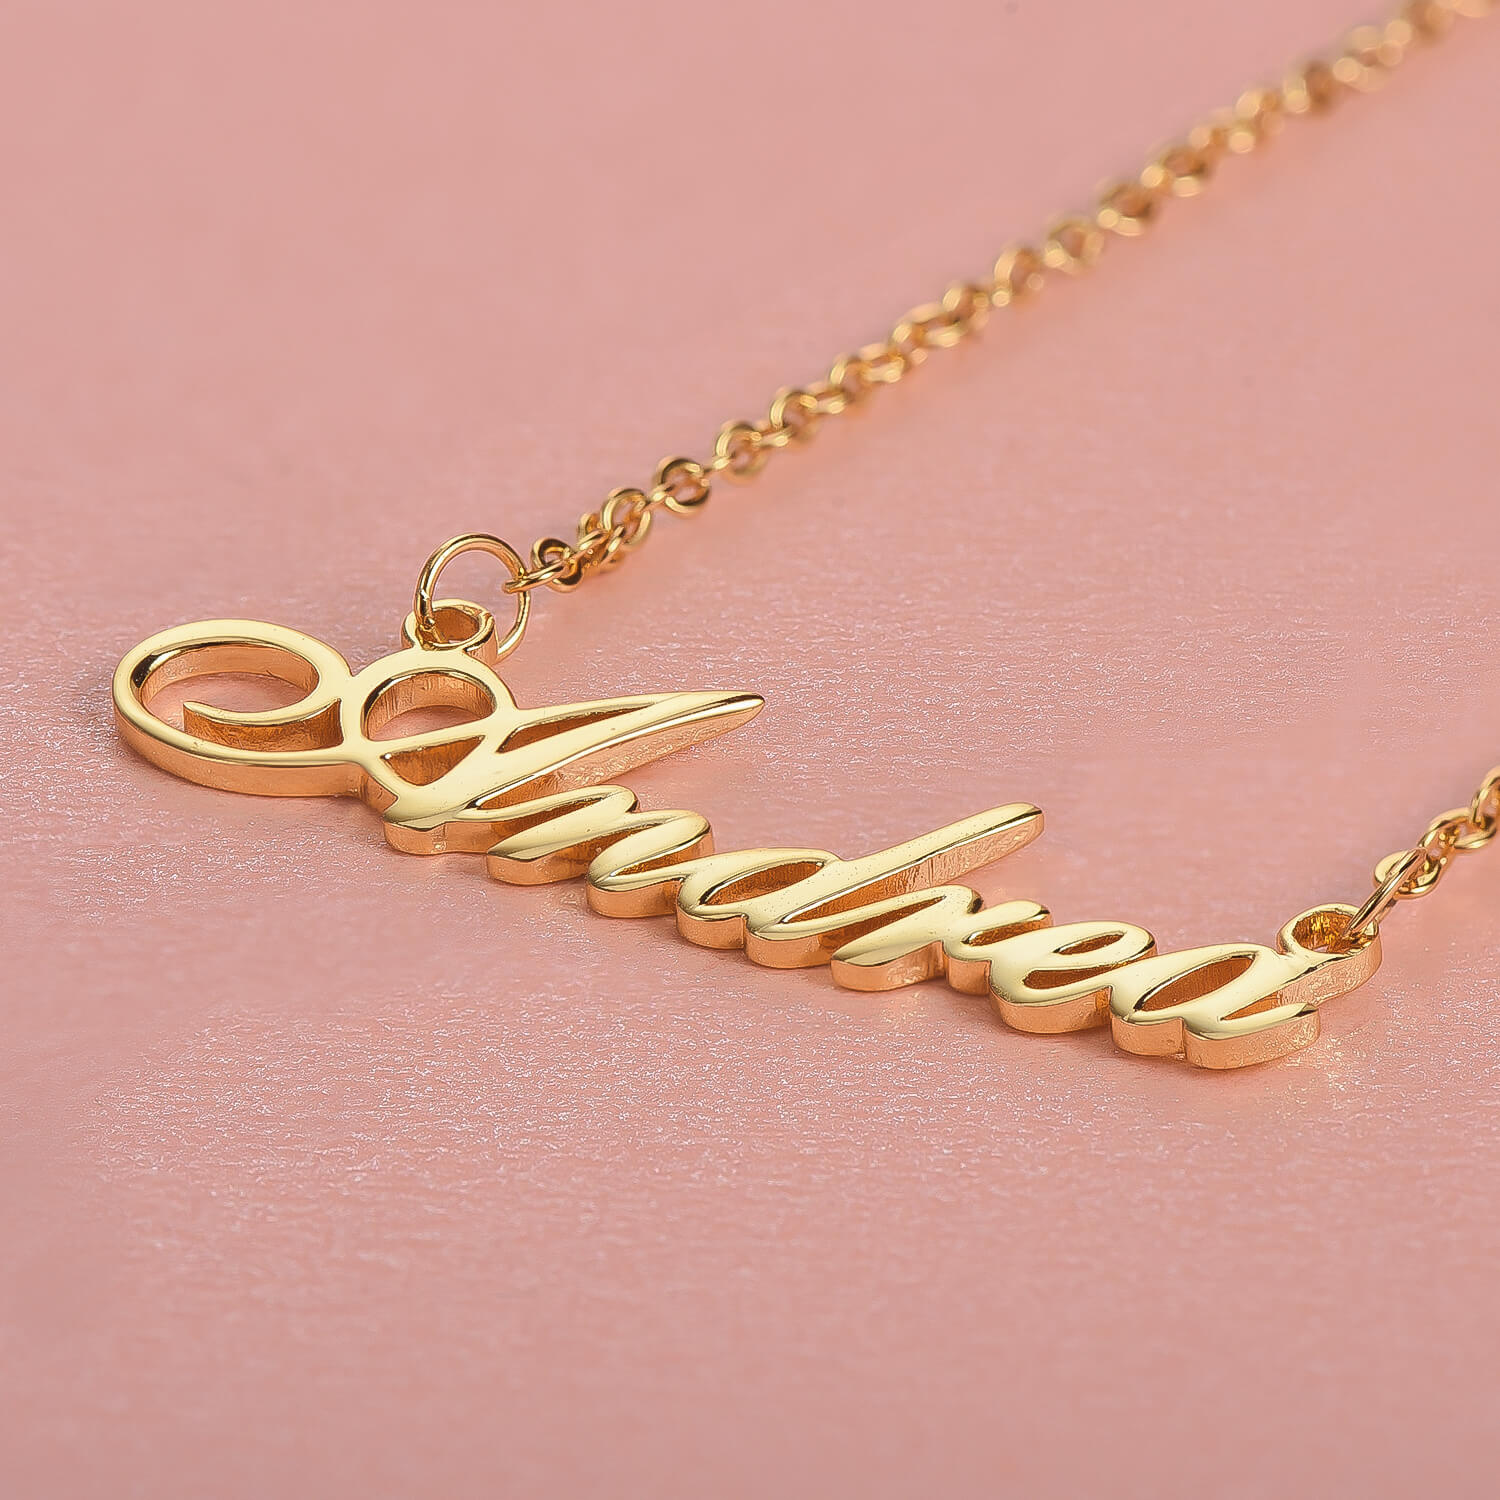 Personalized Custom Gold Plated Name Necklace Jewelry For Women Girl Silviax 